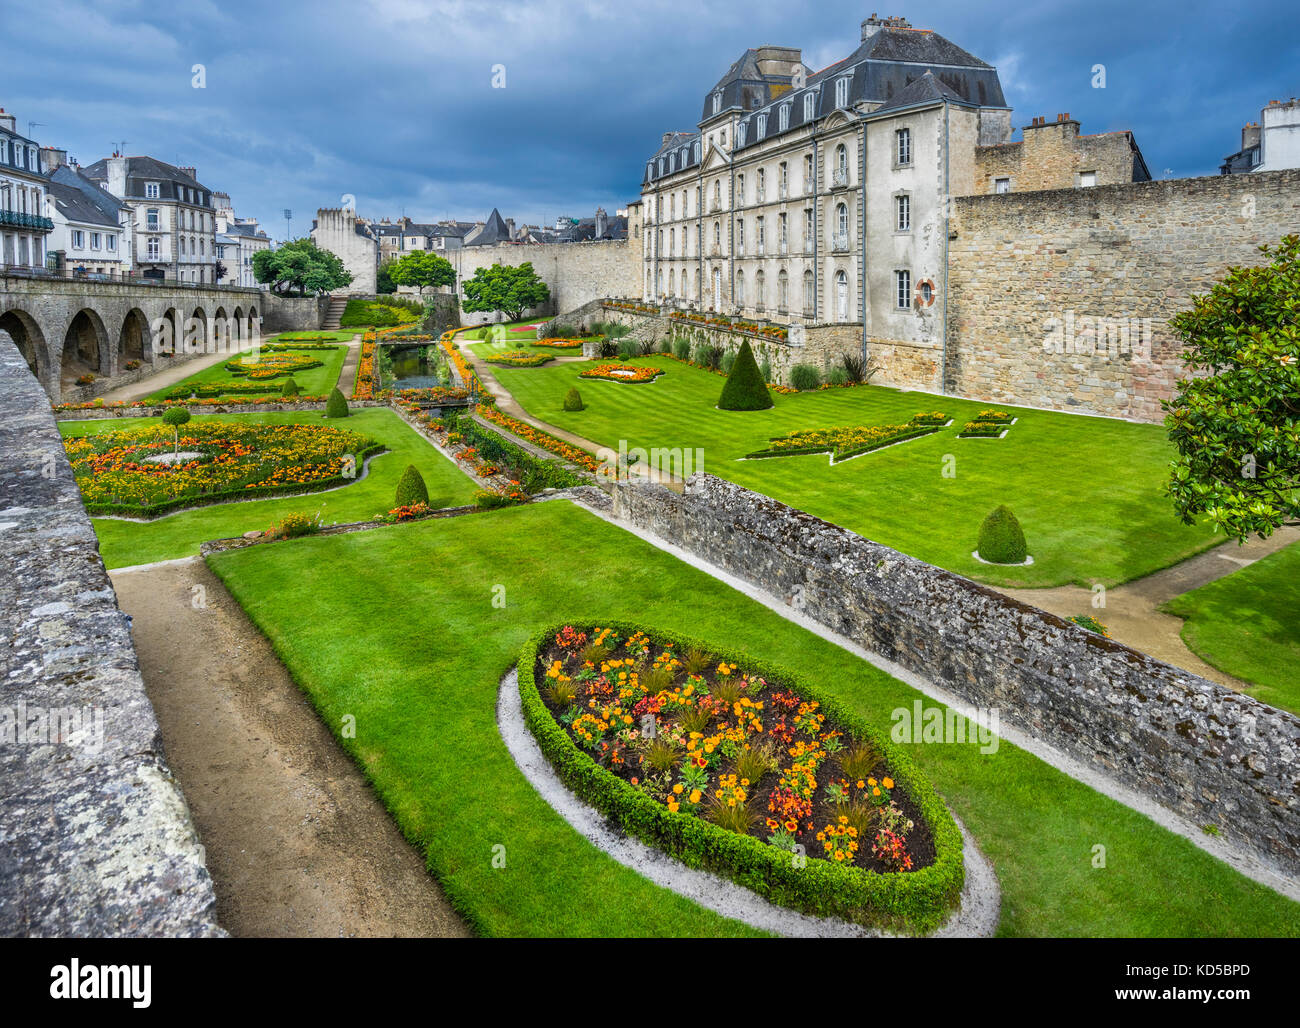 France, Brittany, Morbihan, Vannes, Castle and Gardens of Hermine (Chateau de l'Hermine) integrated in the ramparts of the walled city Stock Photo